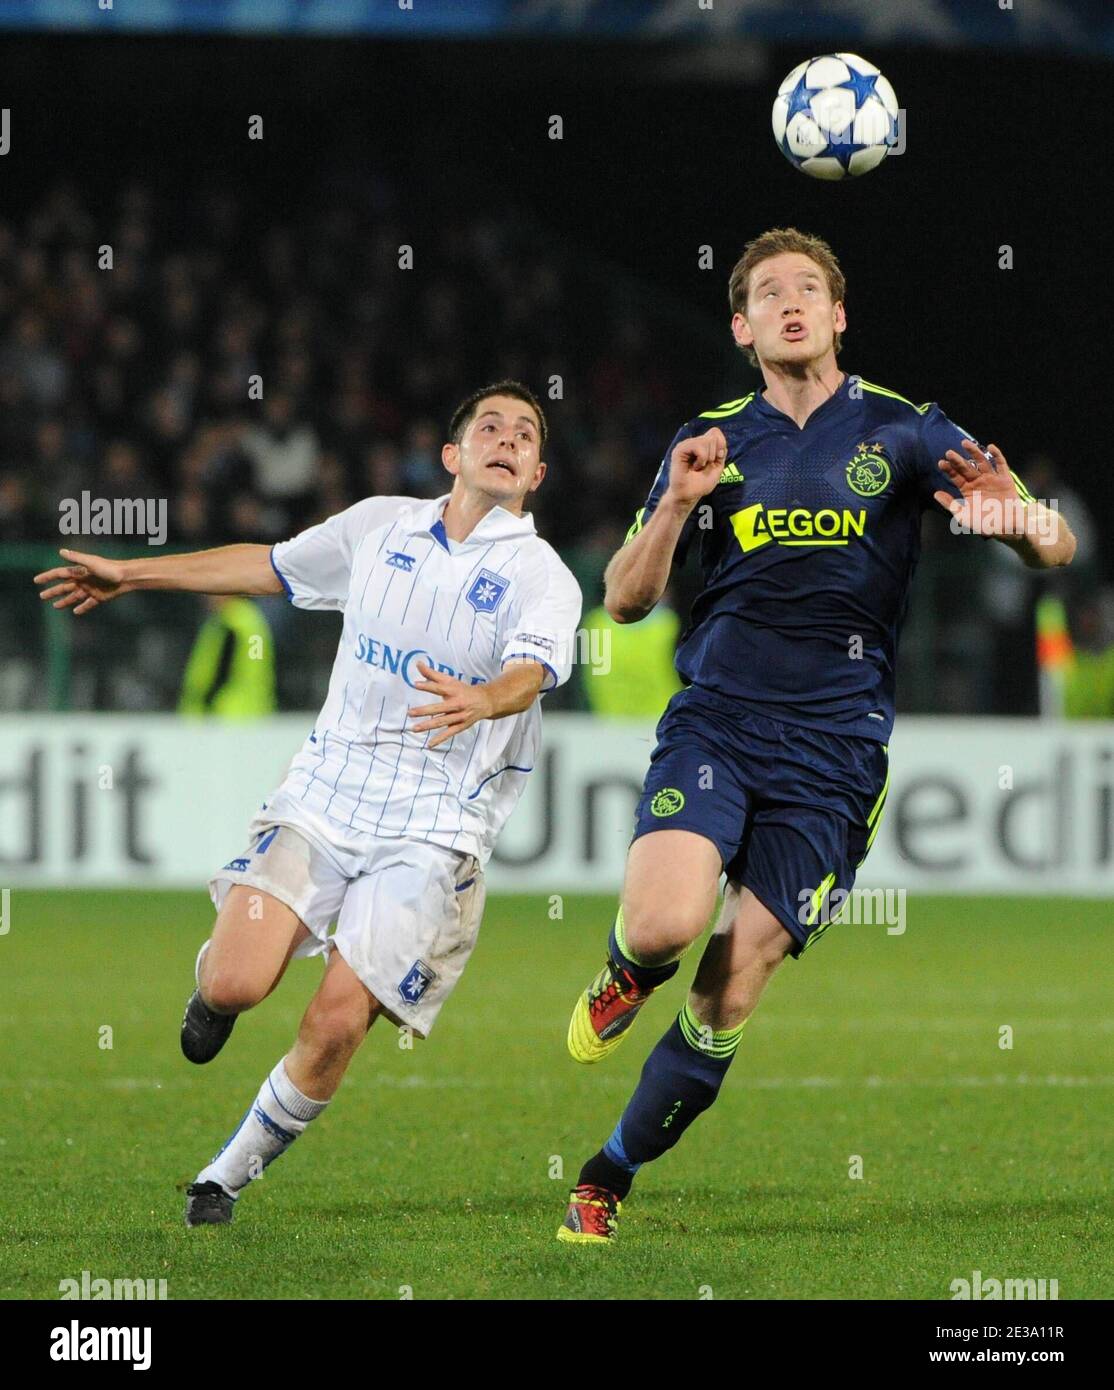 AJ Auxerre's Dariusz Dudka during the UEFA Champions League soccer match, group G, AJ Auxerre vs AFC Ajax at L'Abbe Deschamps stadium in Auxerre, France on November 3, 2010. Auxerre won 2-1. Photo by Christian Liewig/ABACAPRESS.COM Stock Photo